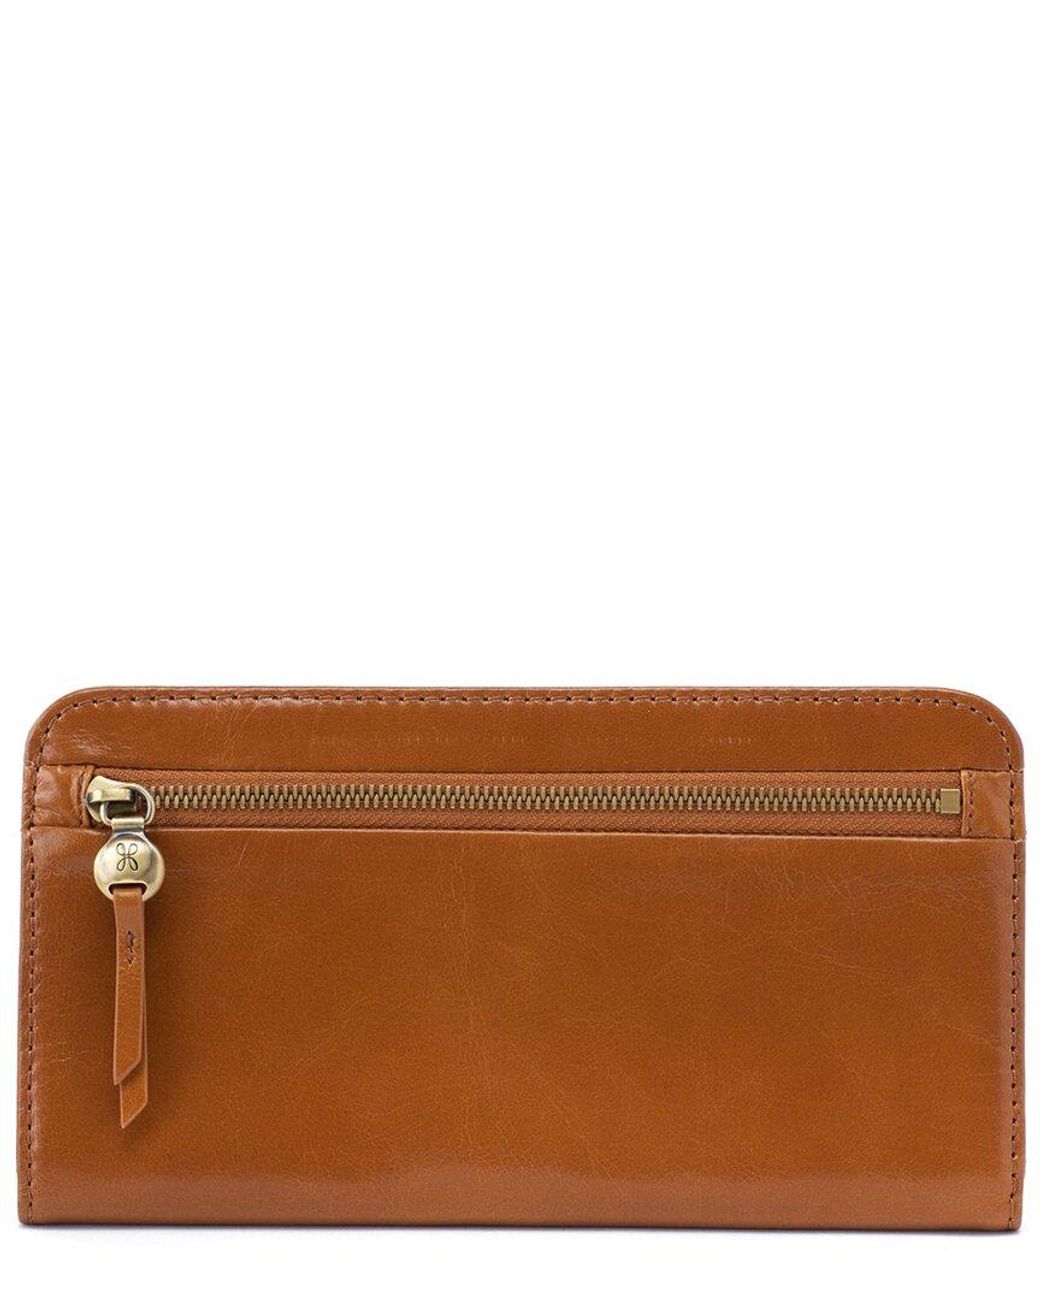 Hobo International Angle Leather Continental Wallet in Brown | Lyst